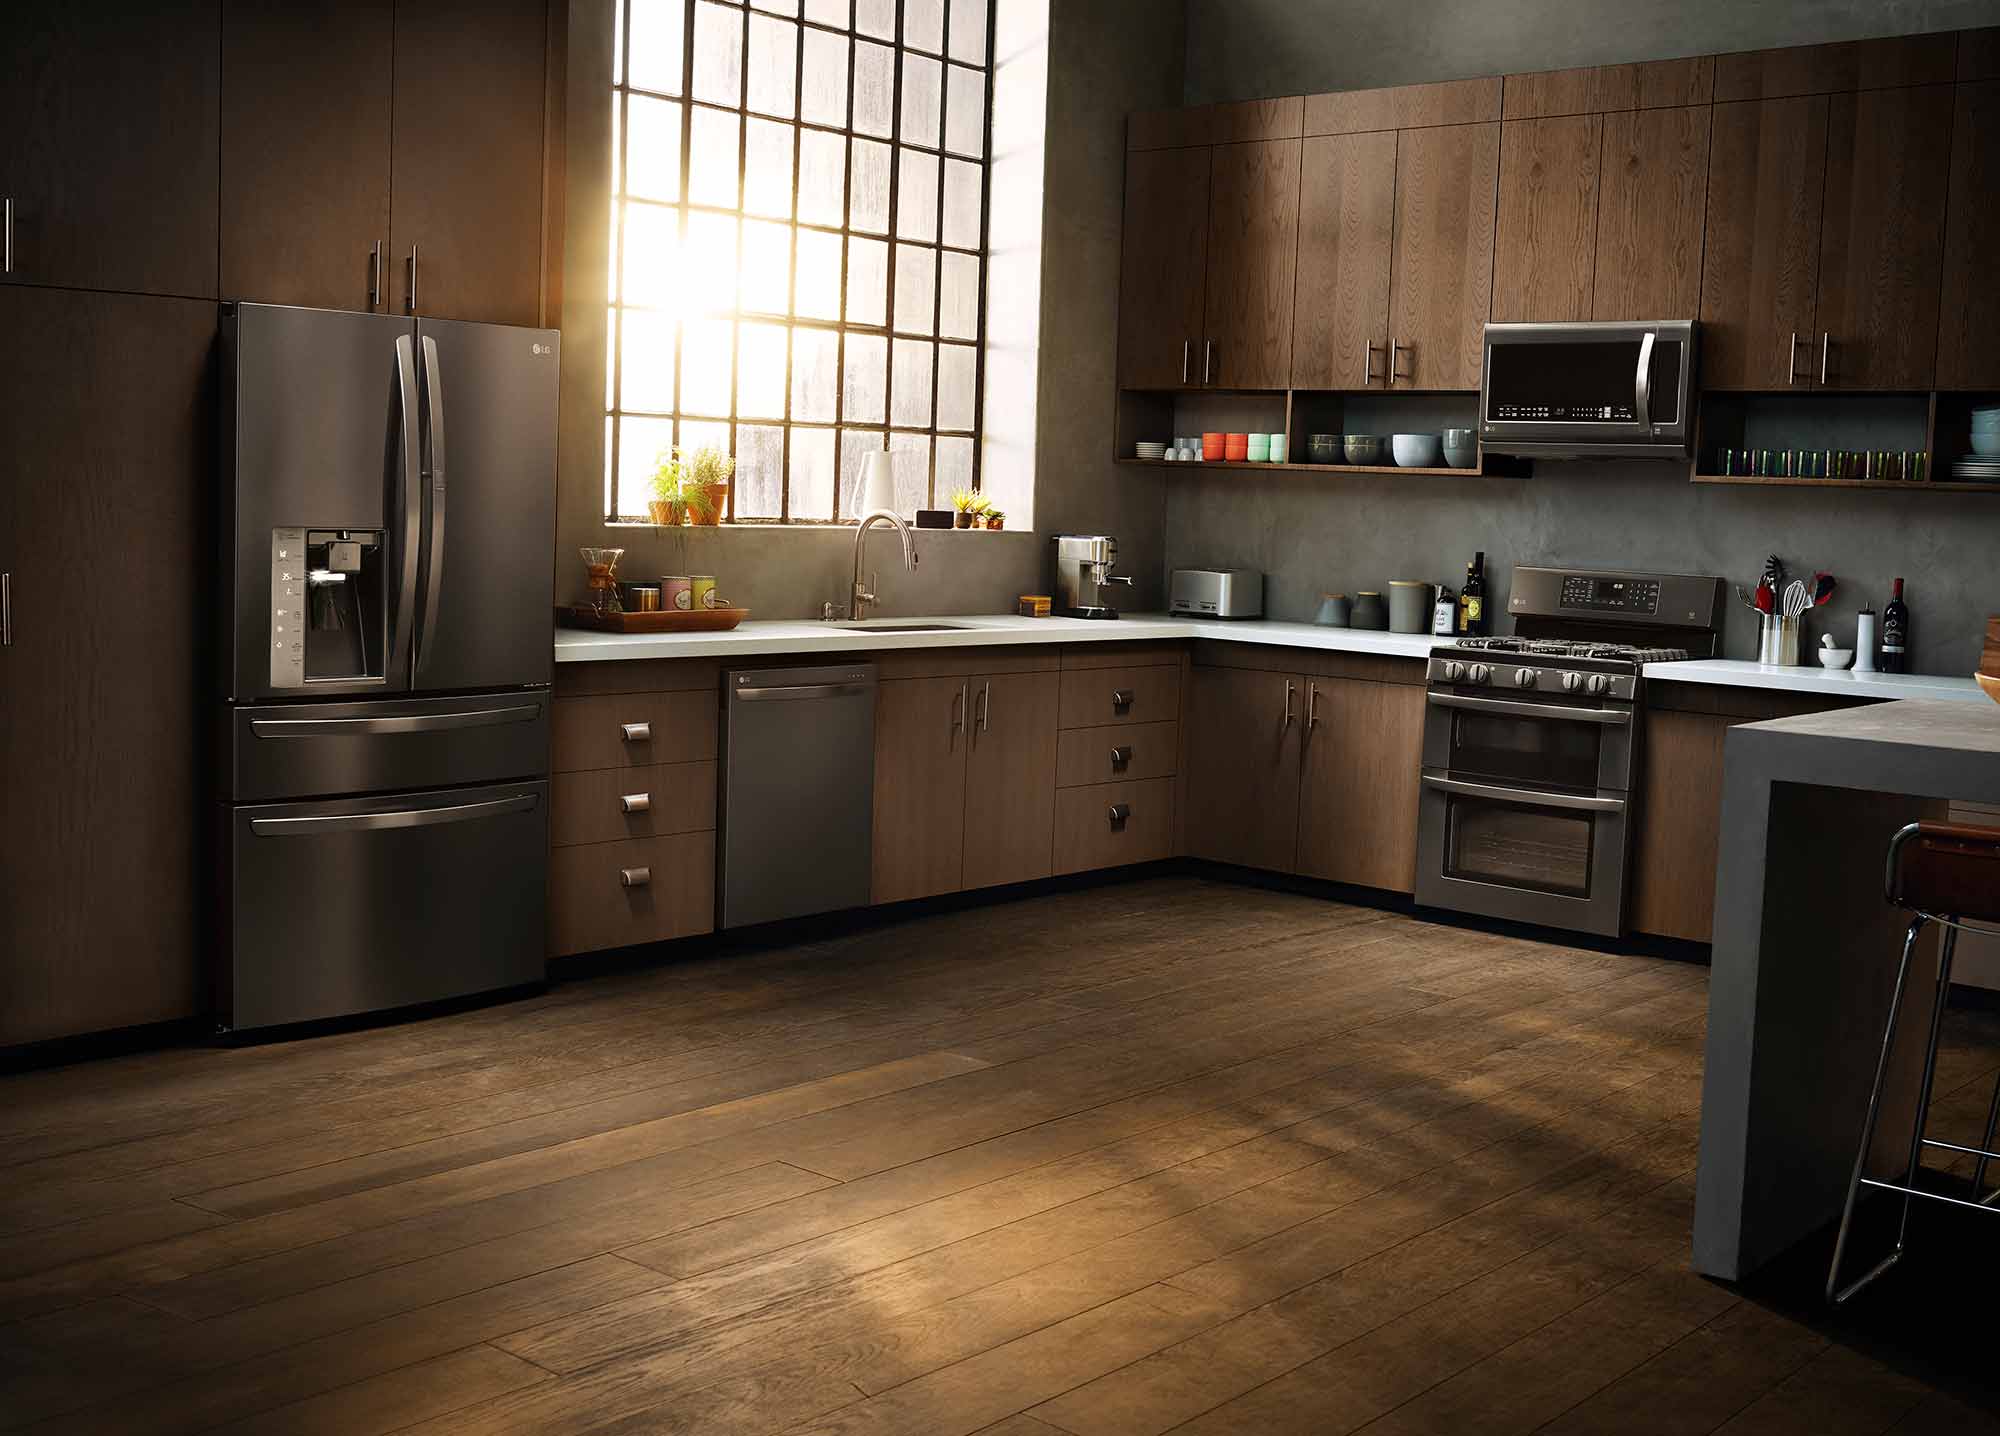 kitchens-with-black-stainless-steel-appliances-in-the-kitchen-black-is-the-new-black-ndash-sponsored-ldquoblack-appliances-are-a-great-alternative-to-stainless-steel-especially-in.jpg